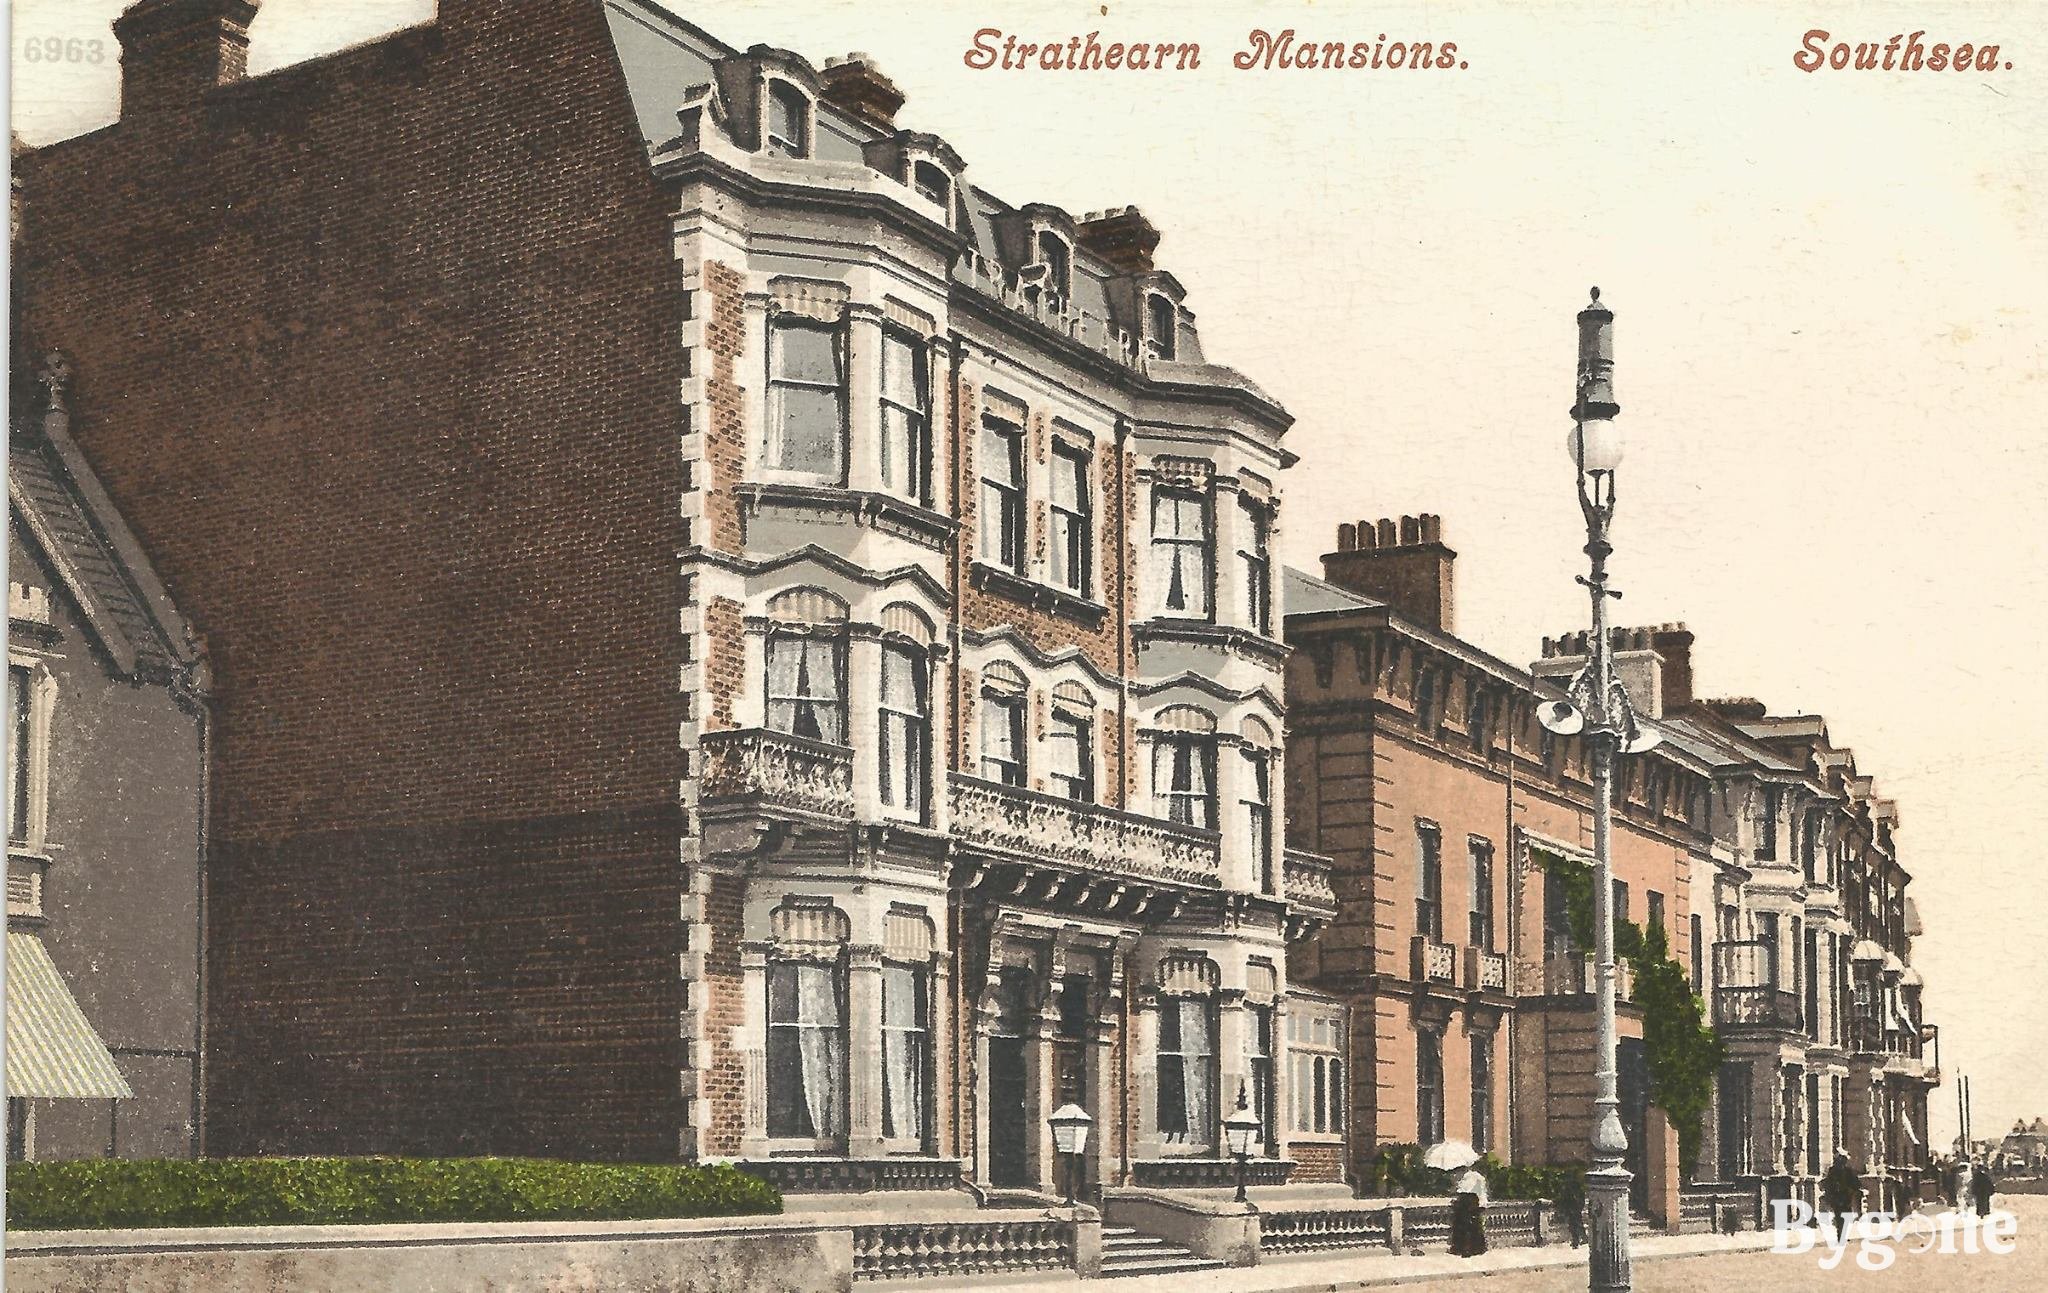 Strathearn Mansions, Southsea